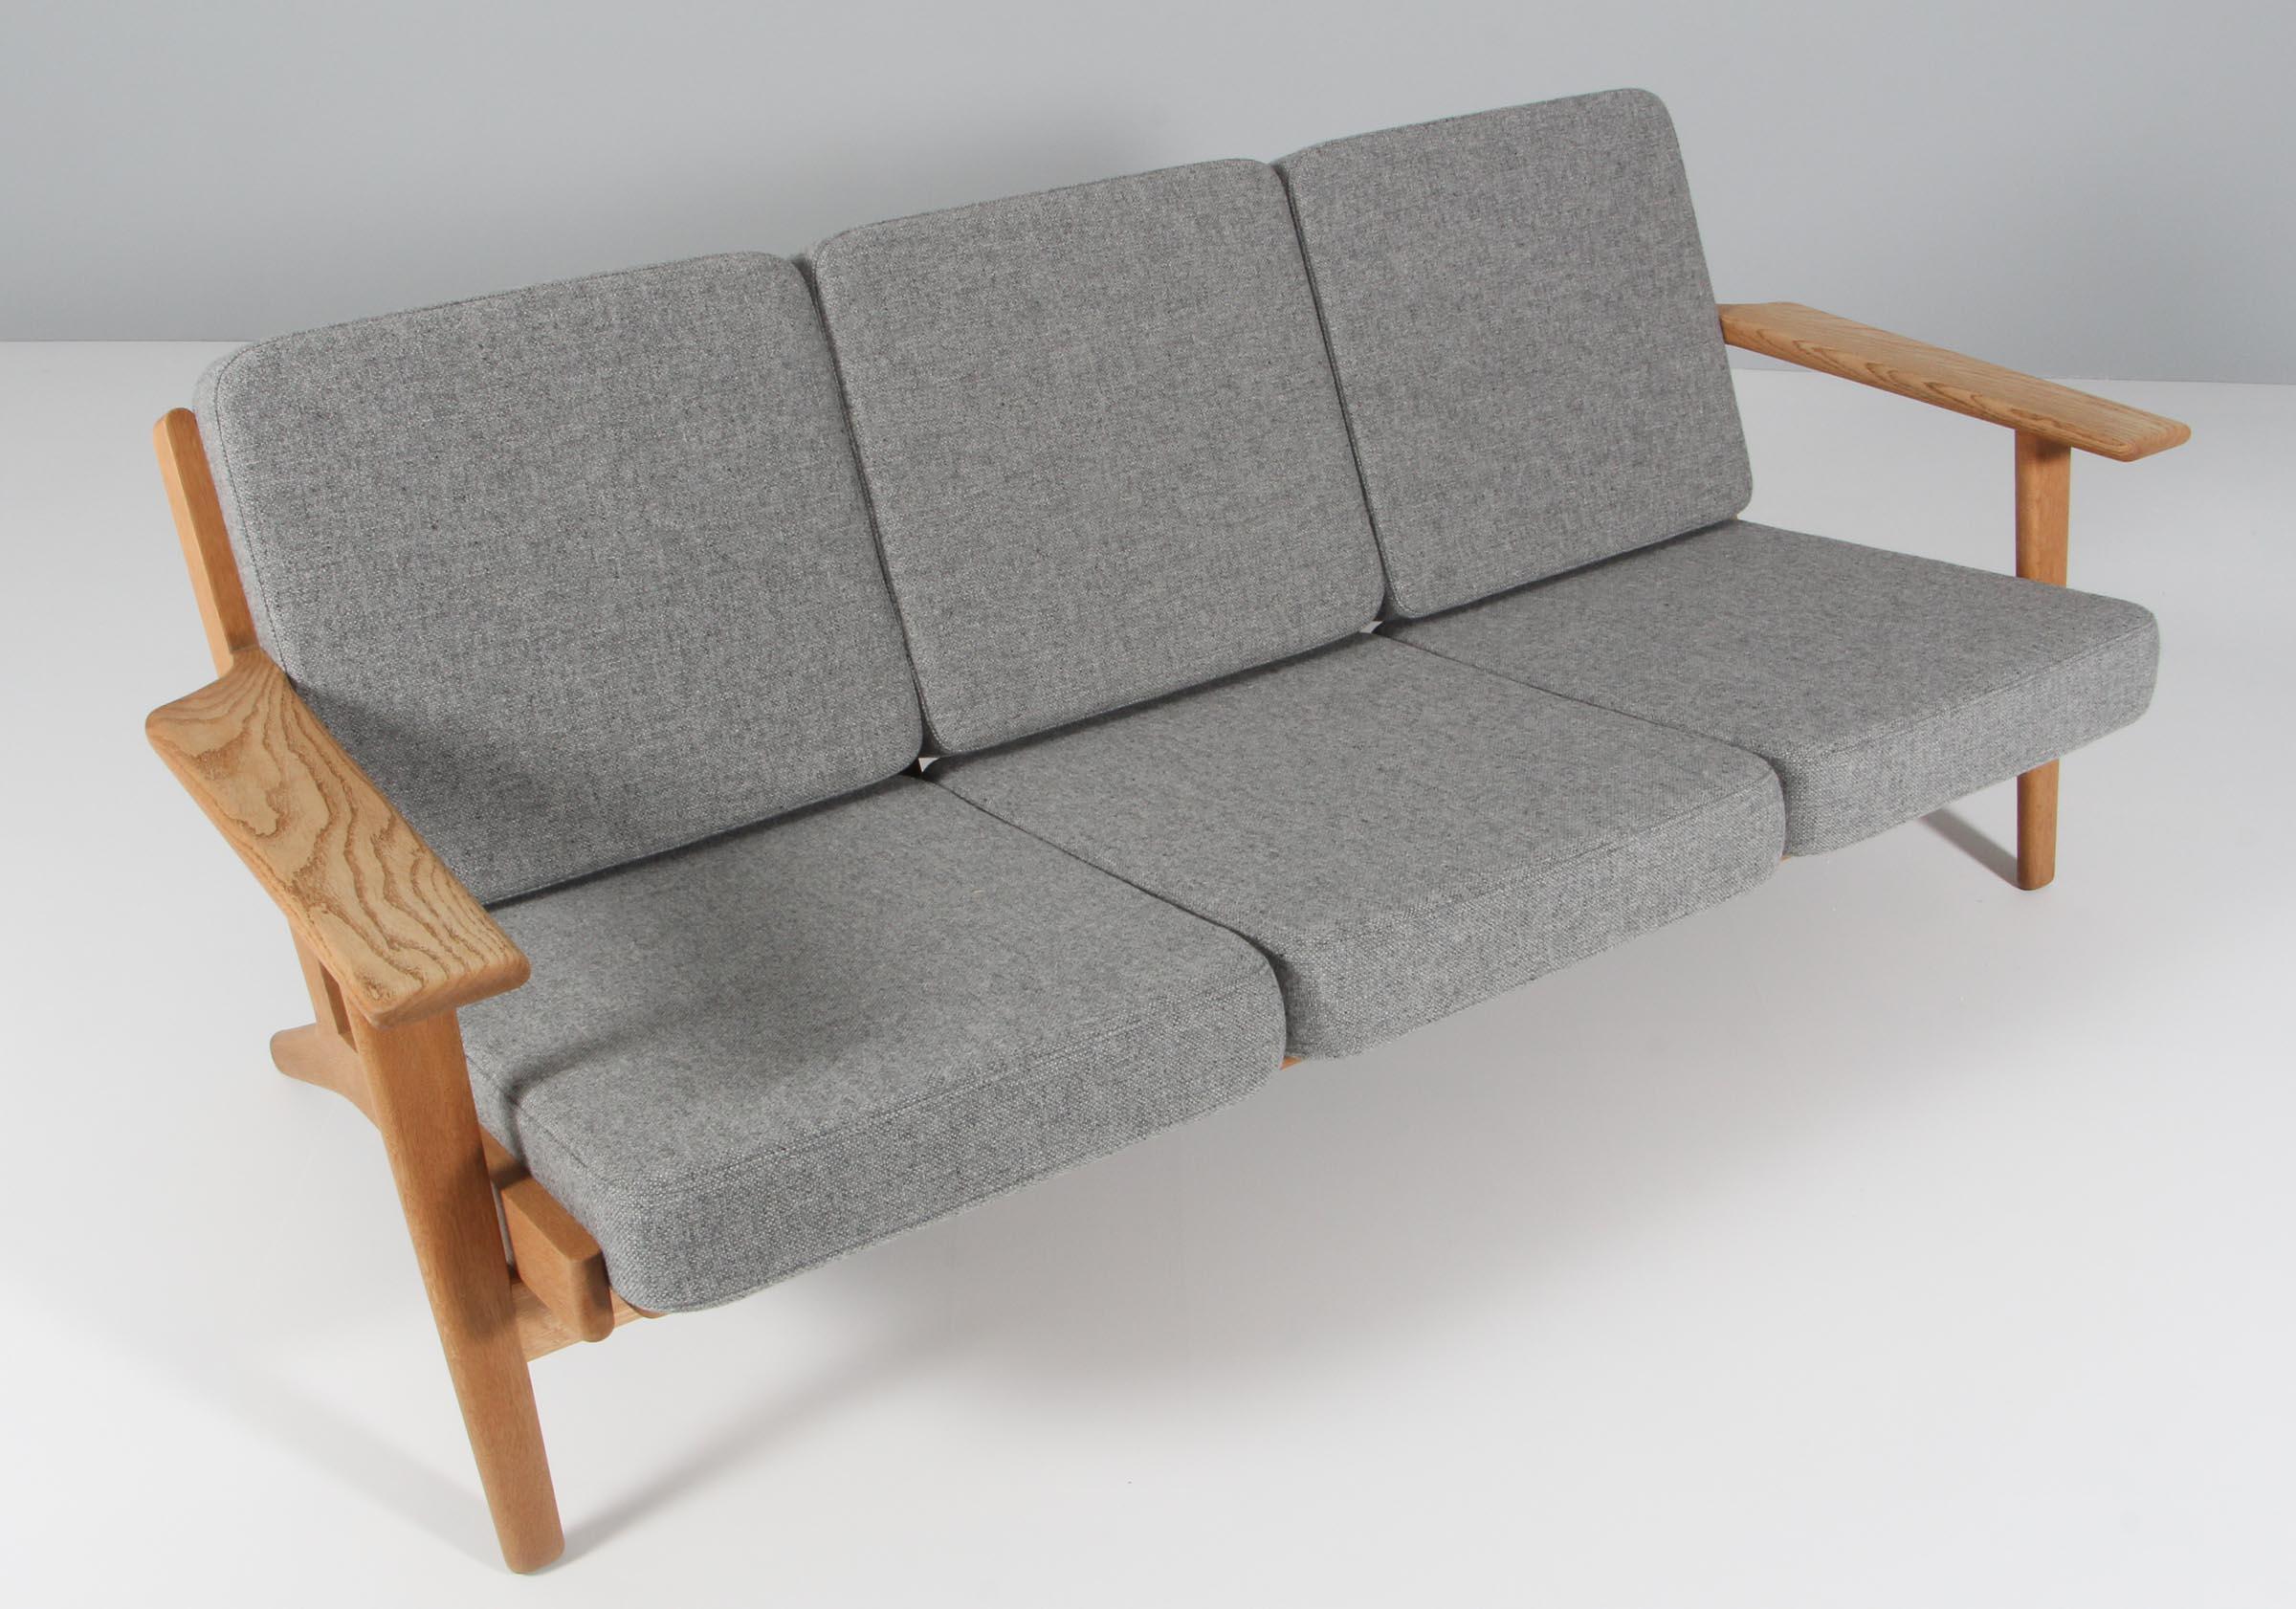 Hans J. Wegner three-seat sofa made of solid soap treated oak.

New upholstered with Hallingdal 130 from Kvadrat

Model 290, made by GETAMA.

